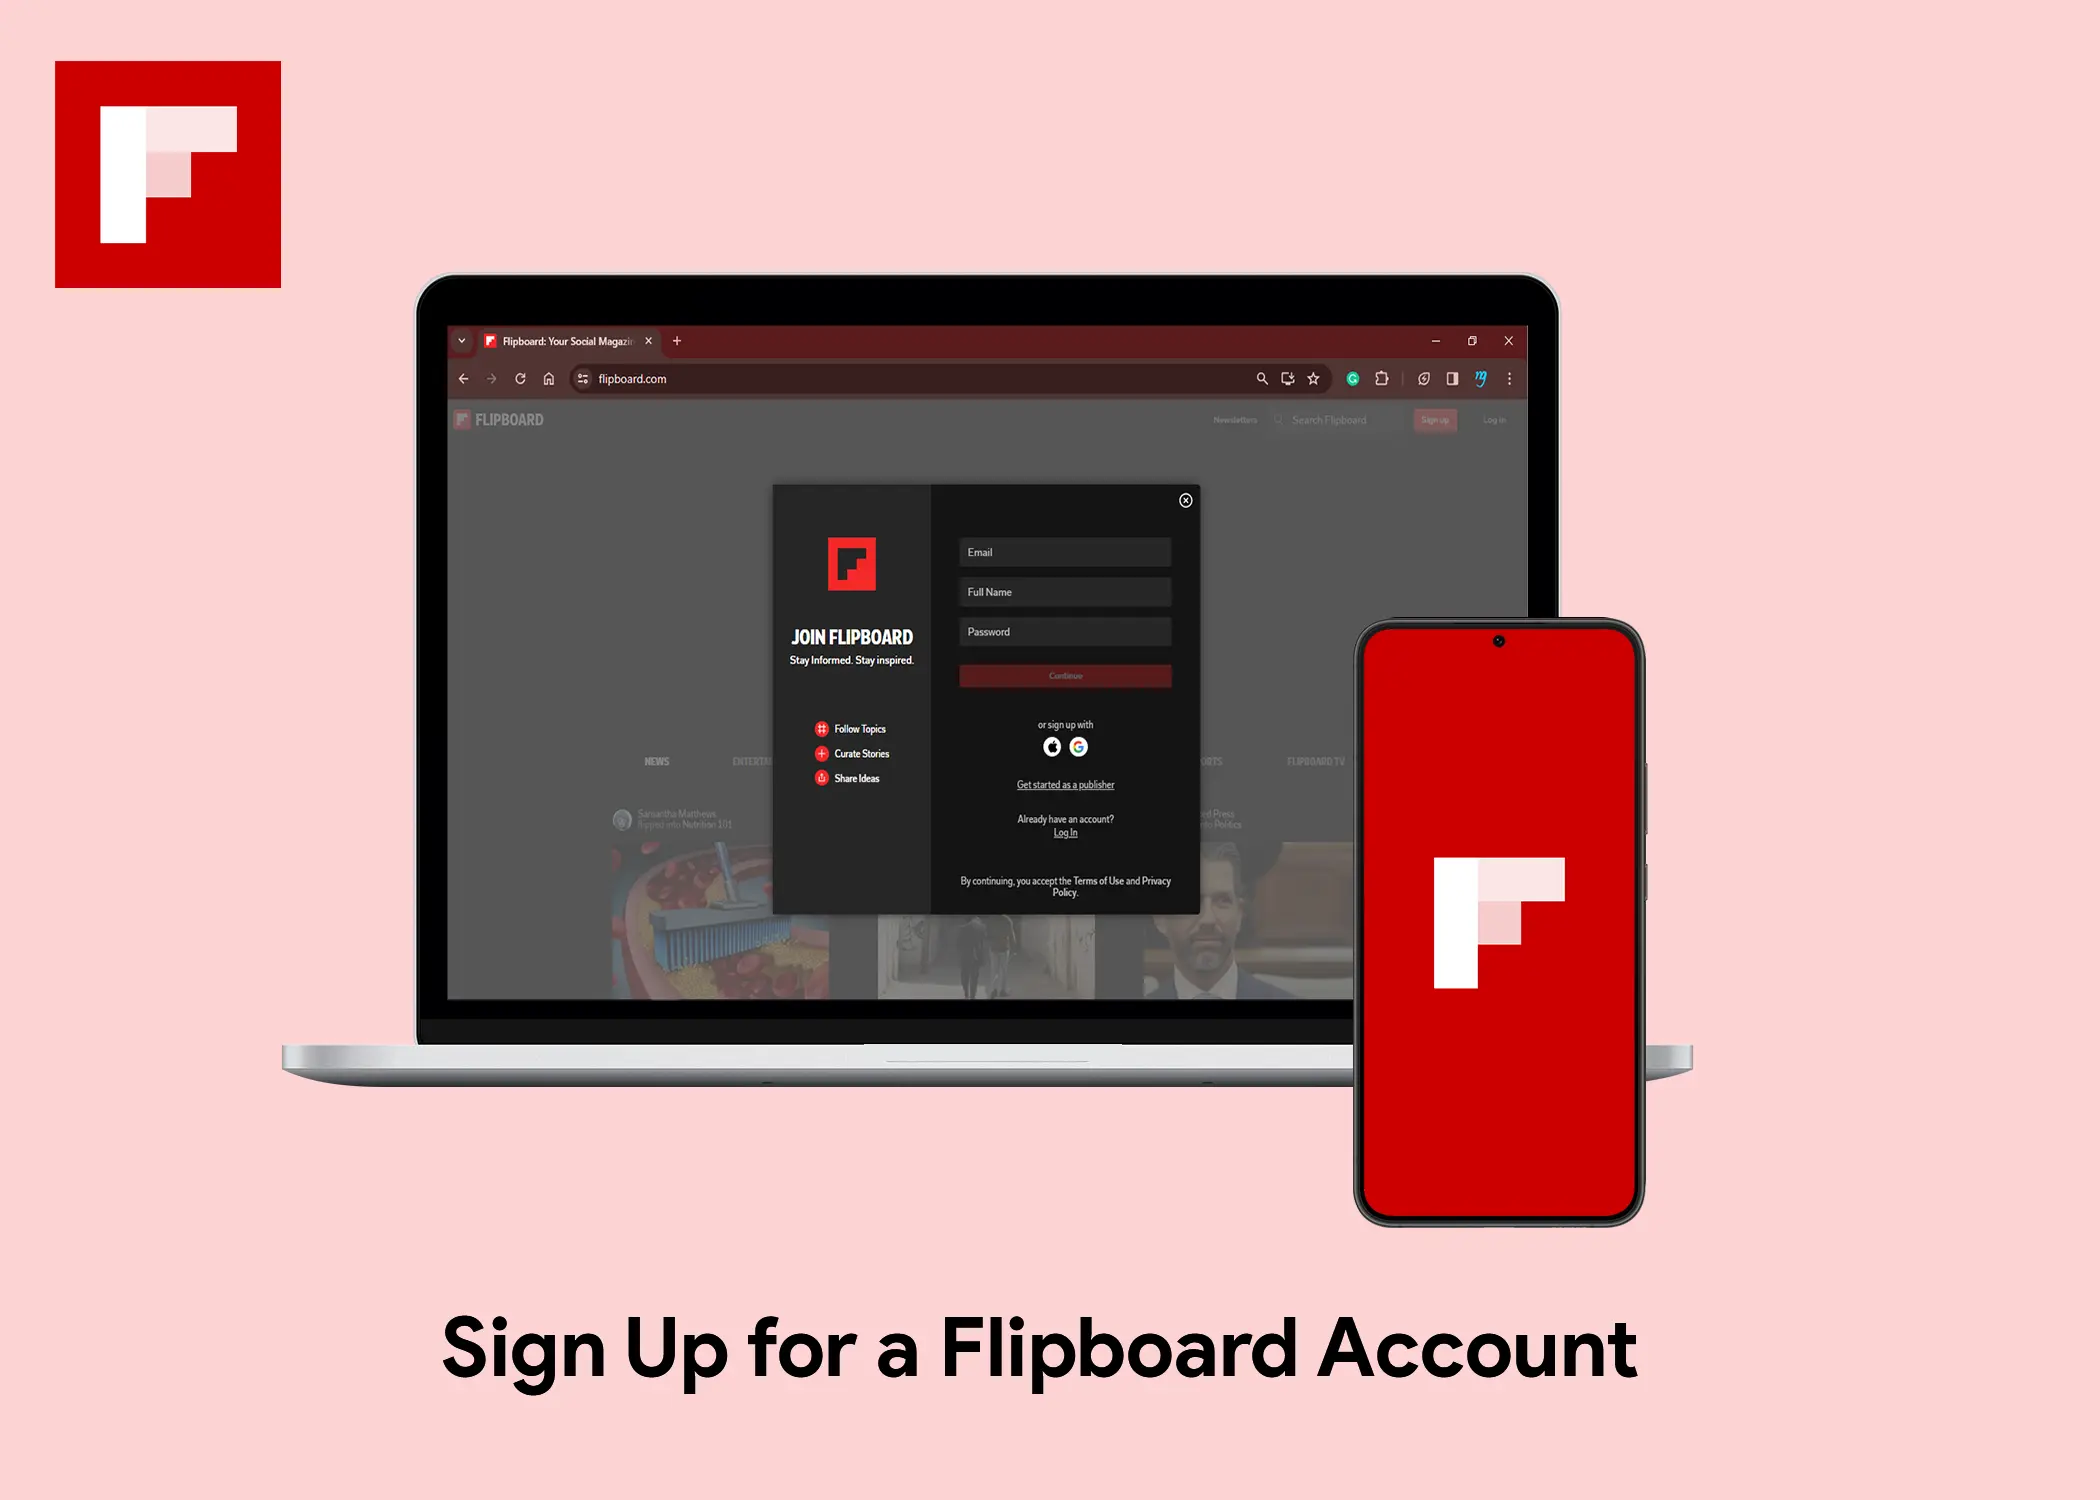 How to Sign Up for a Flipboard Account